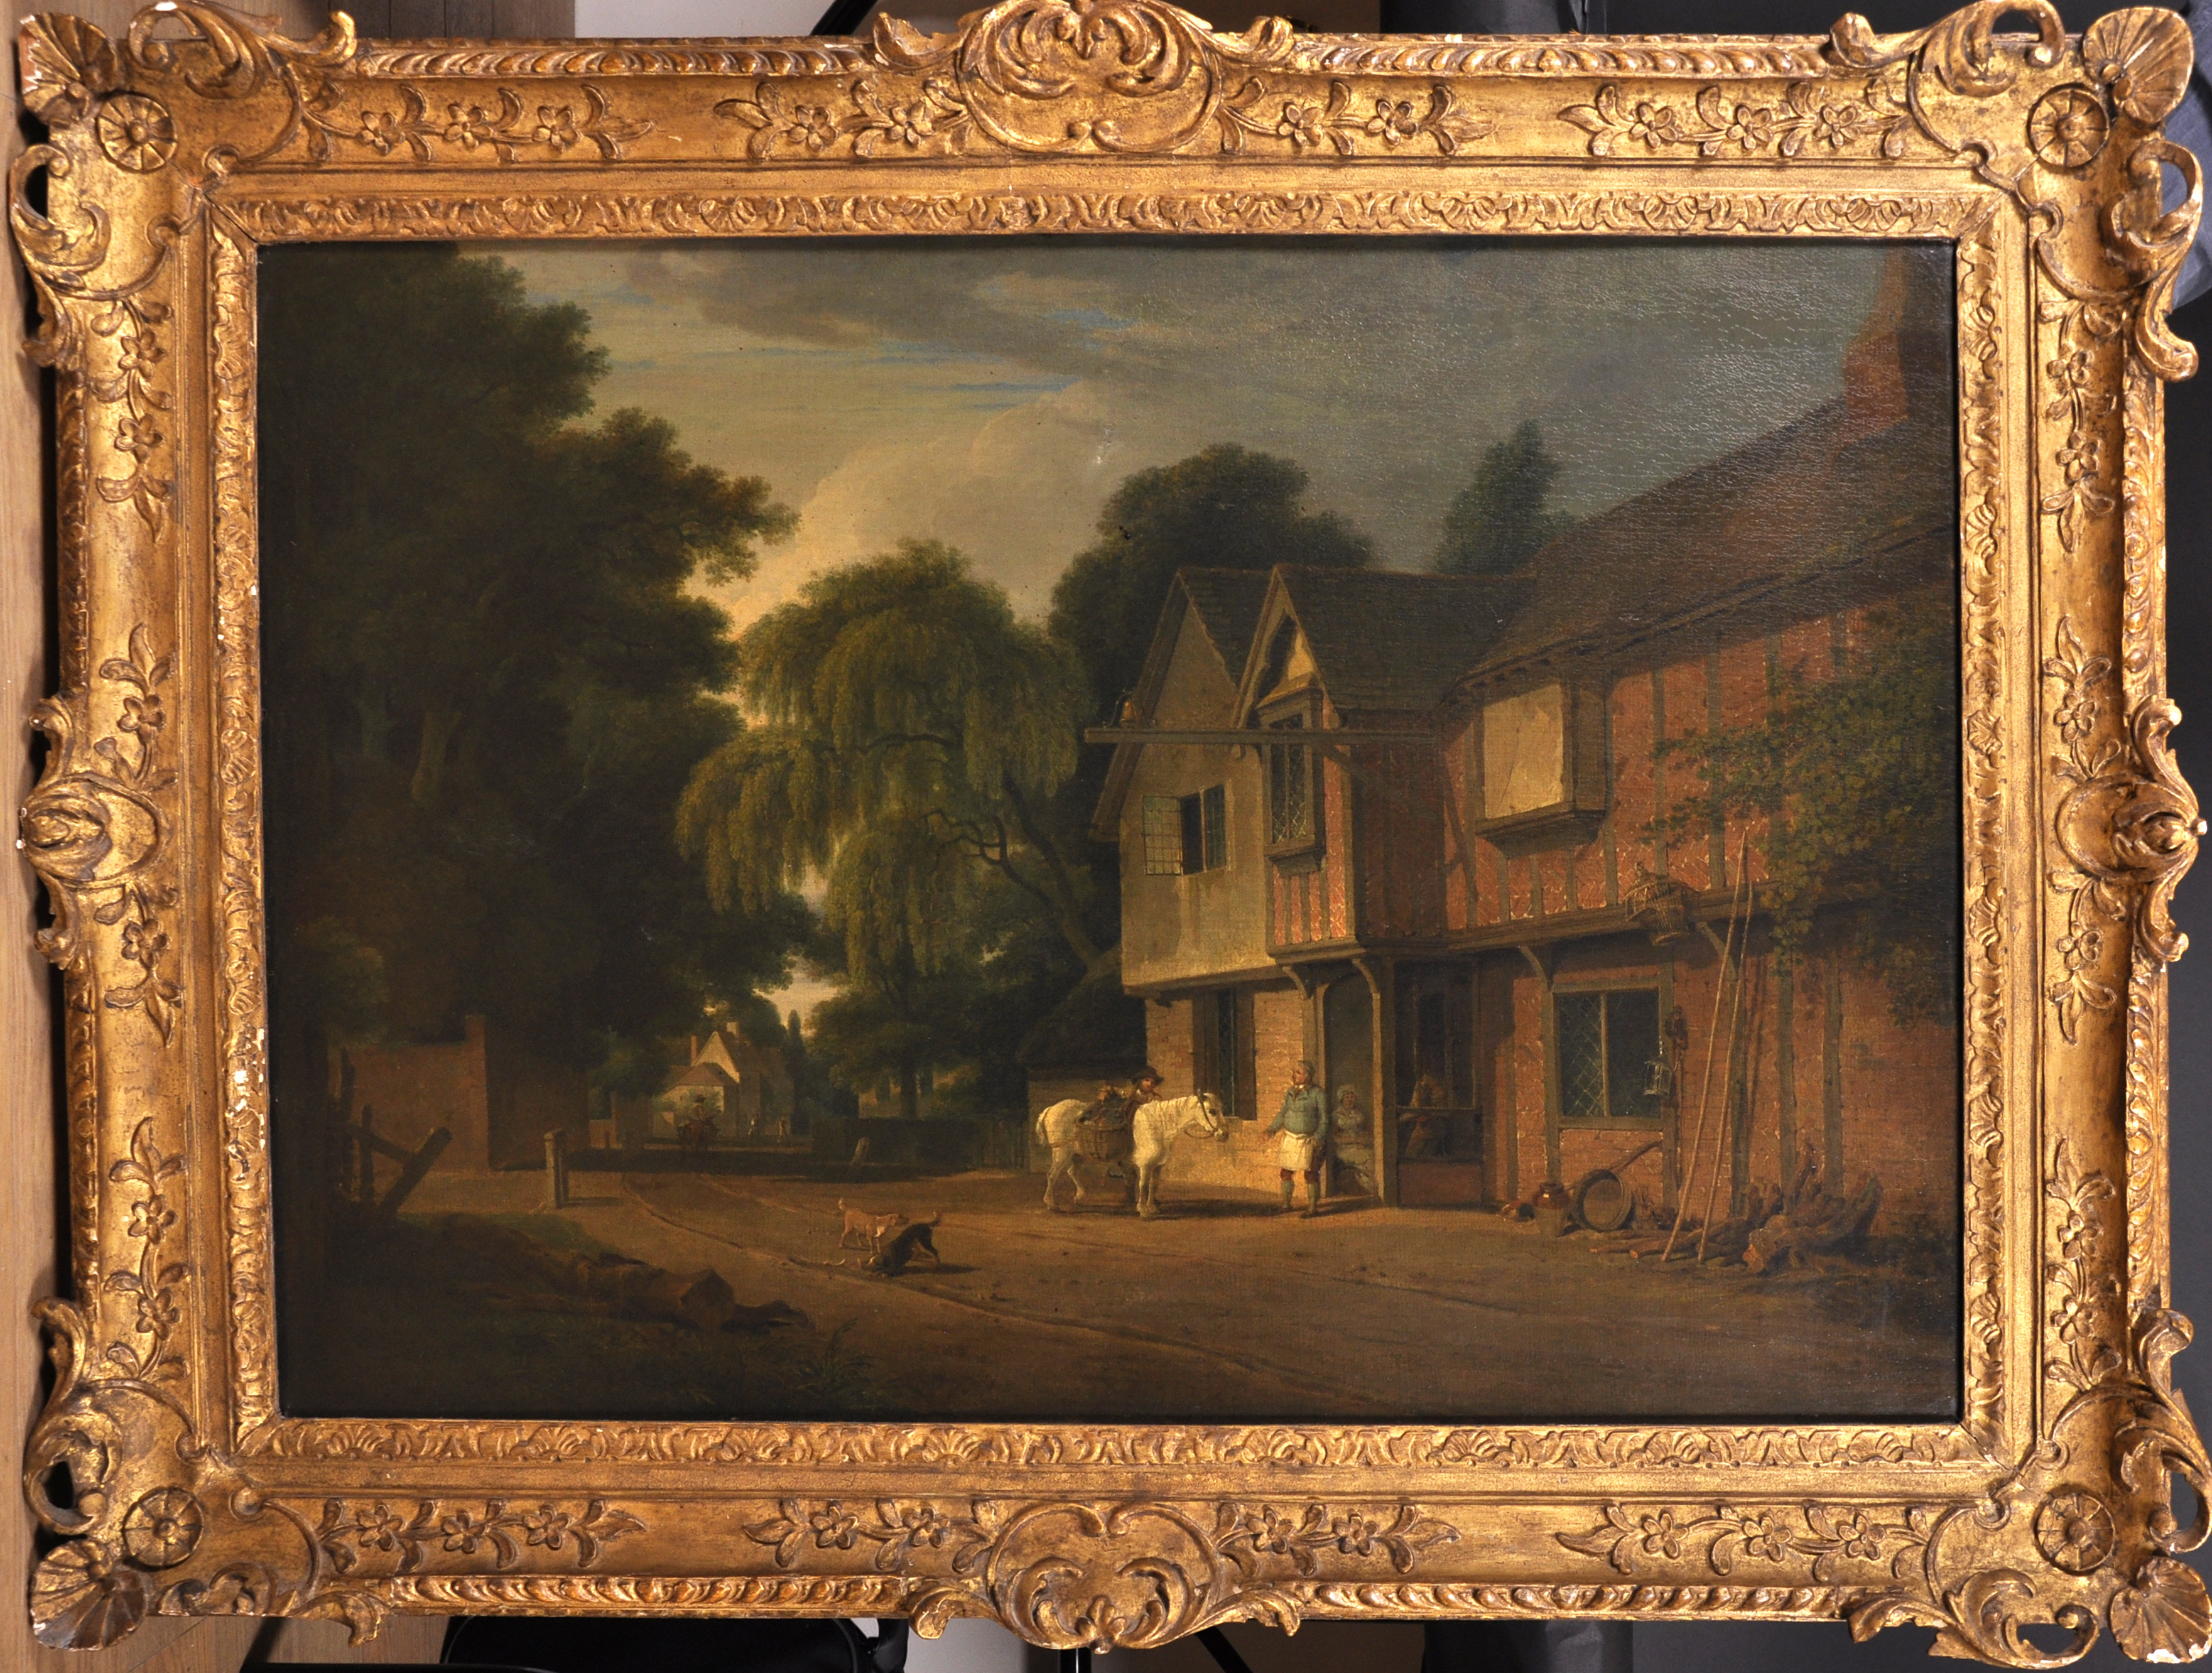 Andrew Wilson (1780-1848) British. “A View of The Bell Inn Hurley, Herts”, with Figures and Dogs - Image 2 of 9